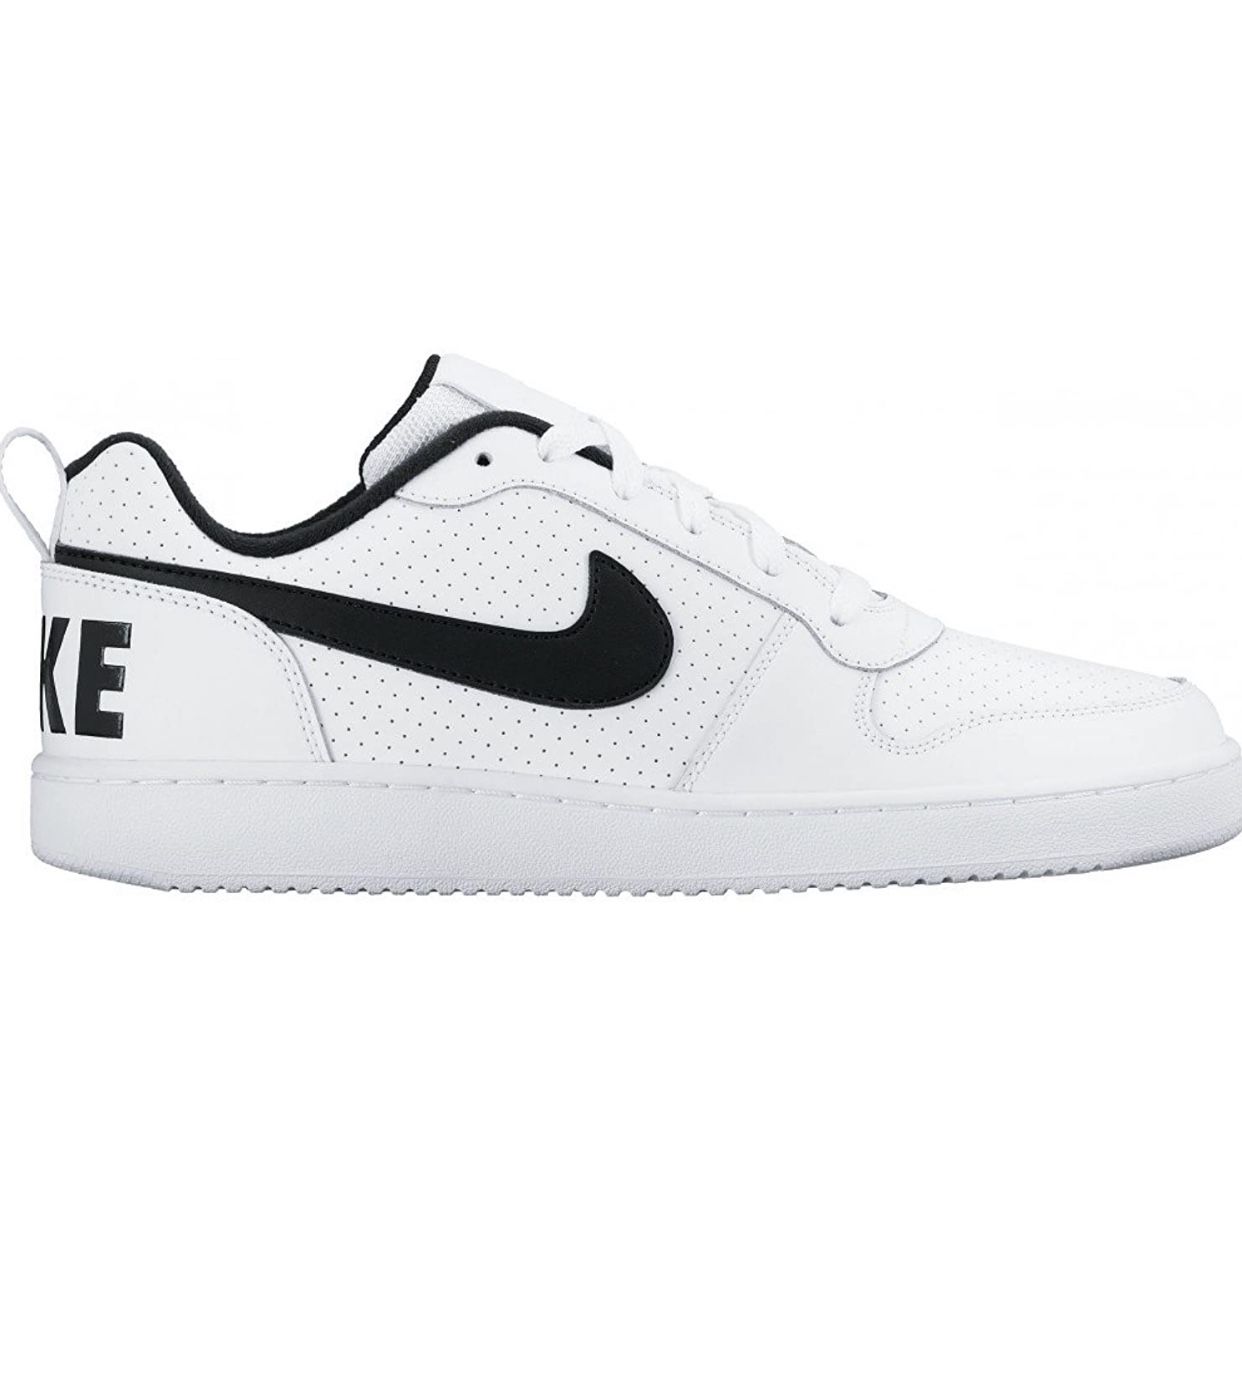 Nike Court Borough Low White/Black 838937-100 Men's Shoes Size 13. Condition is Pre-owned. Worn Once!